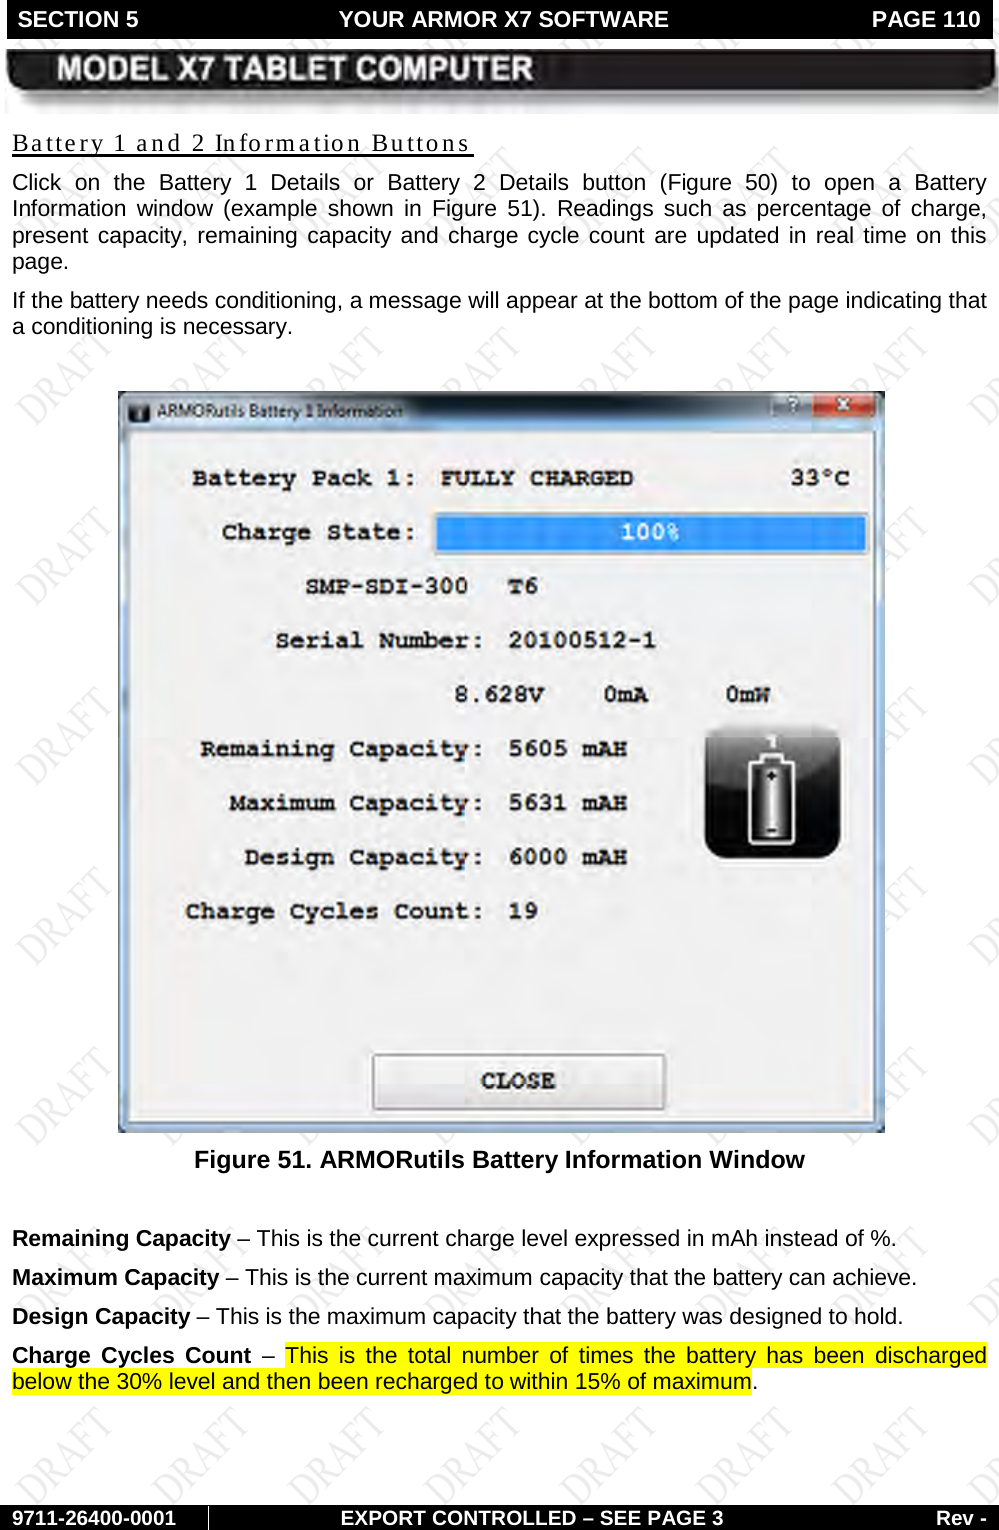 SECTION 5 YOUR ARMOR X7 SOFTWARE  PAGE 110        9711-26400-0001 EXPORT CONTROLLED – SEE PAGE 3 Rev - Click on the Battery 1 Details or Battery 2 Details button (Battery 1 and 2 Information Buttons Figure 50) to open a Battery Information window (example shown in Figure 51). Readings such as percentage of charge, present capacity, remaining capacity and charge cycle count are updated in real time on this page. If the battery needs conditioning, a message will appear at the bottom of the page indicating that a conditioning is necessary.   Figure 51. ARMORutils Battery Information Window  Remaining Capacity – This is the current charge level expressed in mAh instead of %. Maximum Capacity – This is the current maximum capacity that the battery can achieve. Design Capacity – This is the maximum capacity that the battery was designed to hold. Charge Cycles Count  –  This is the total number of times the battery has been  discharged below the 30% level and then been recharged to within 15% of maximum.   